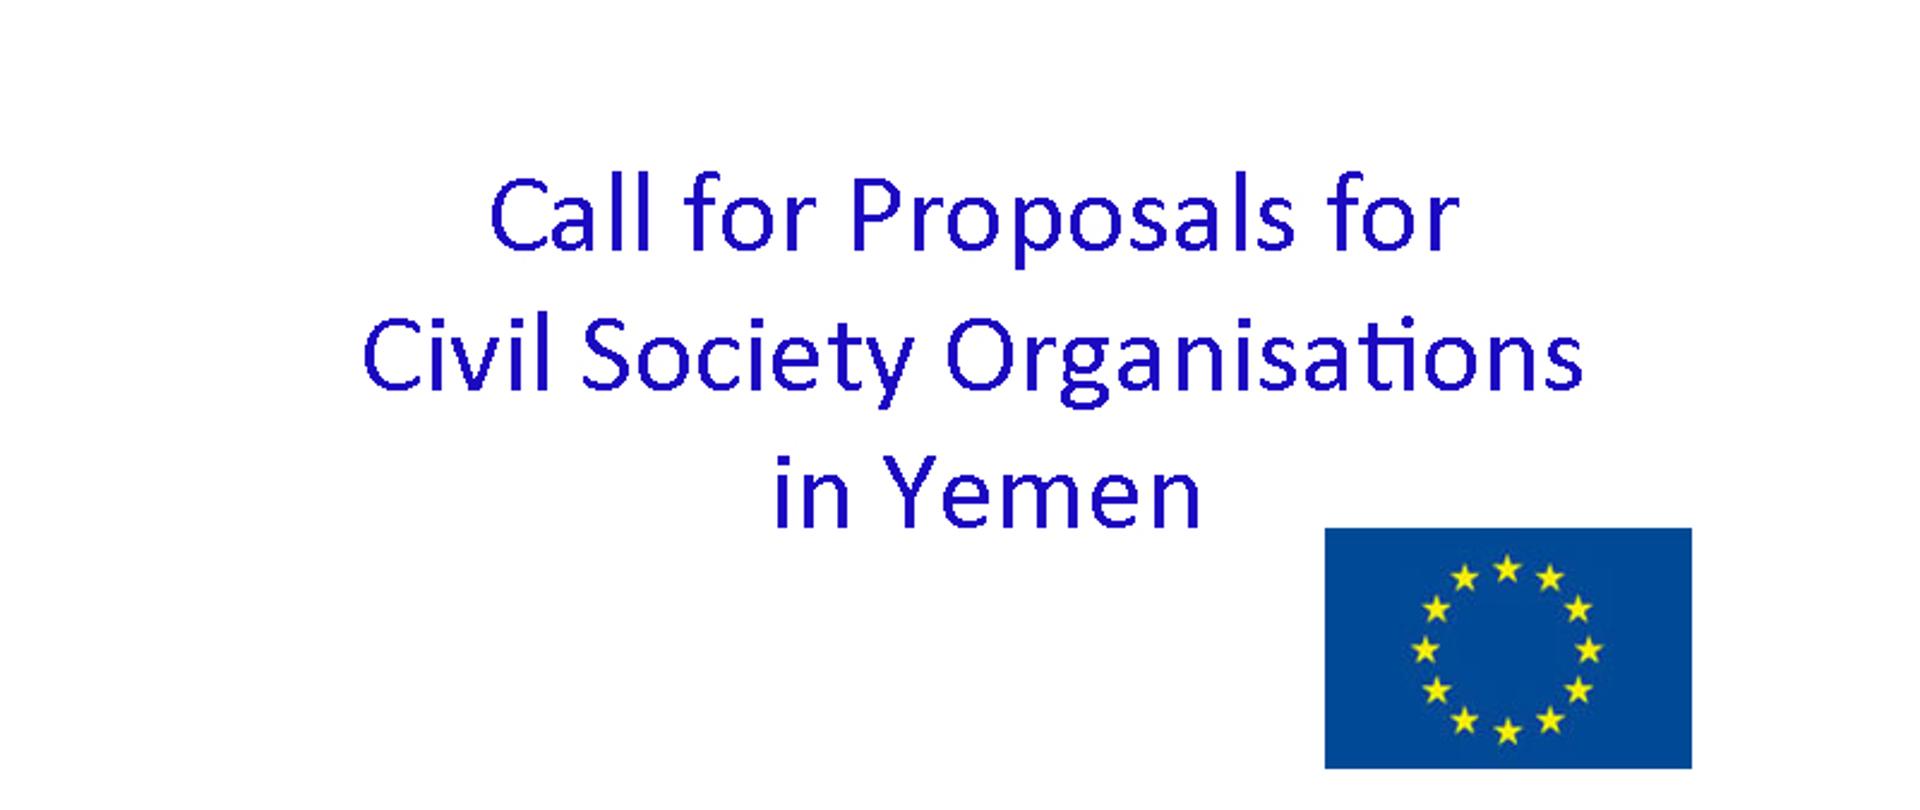 Call for Proposals for Civil Society Oranisations in Yemen